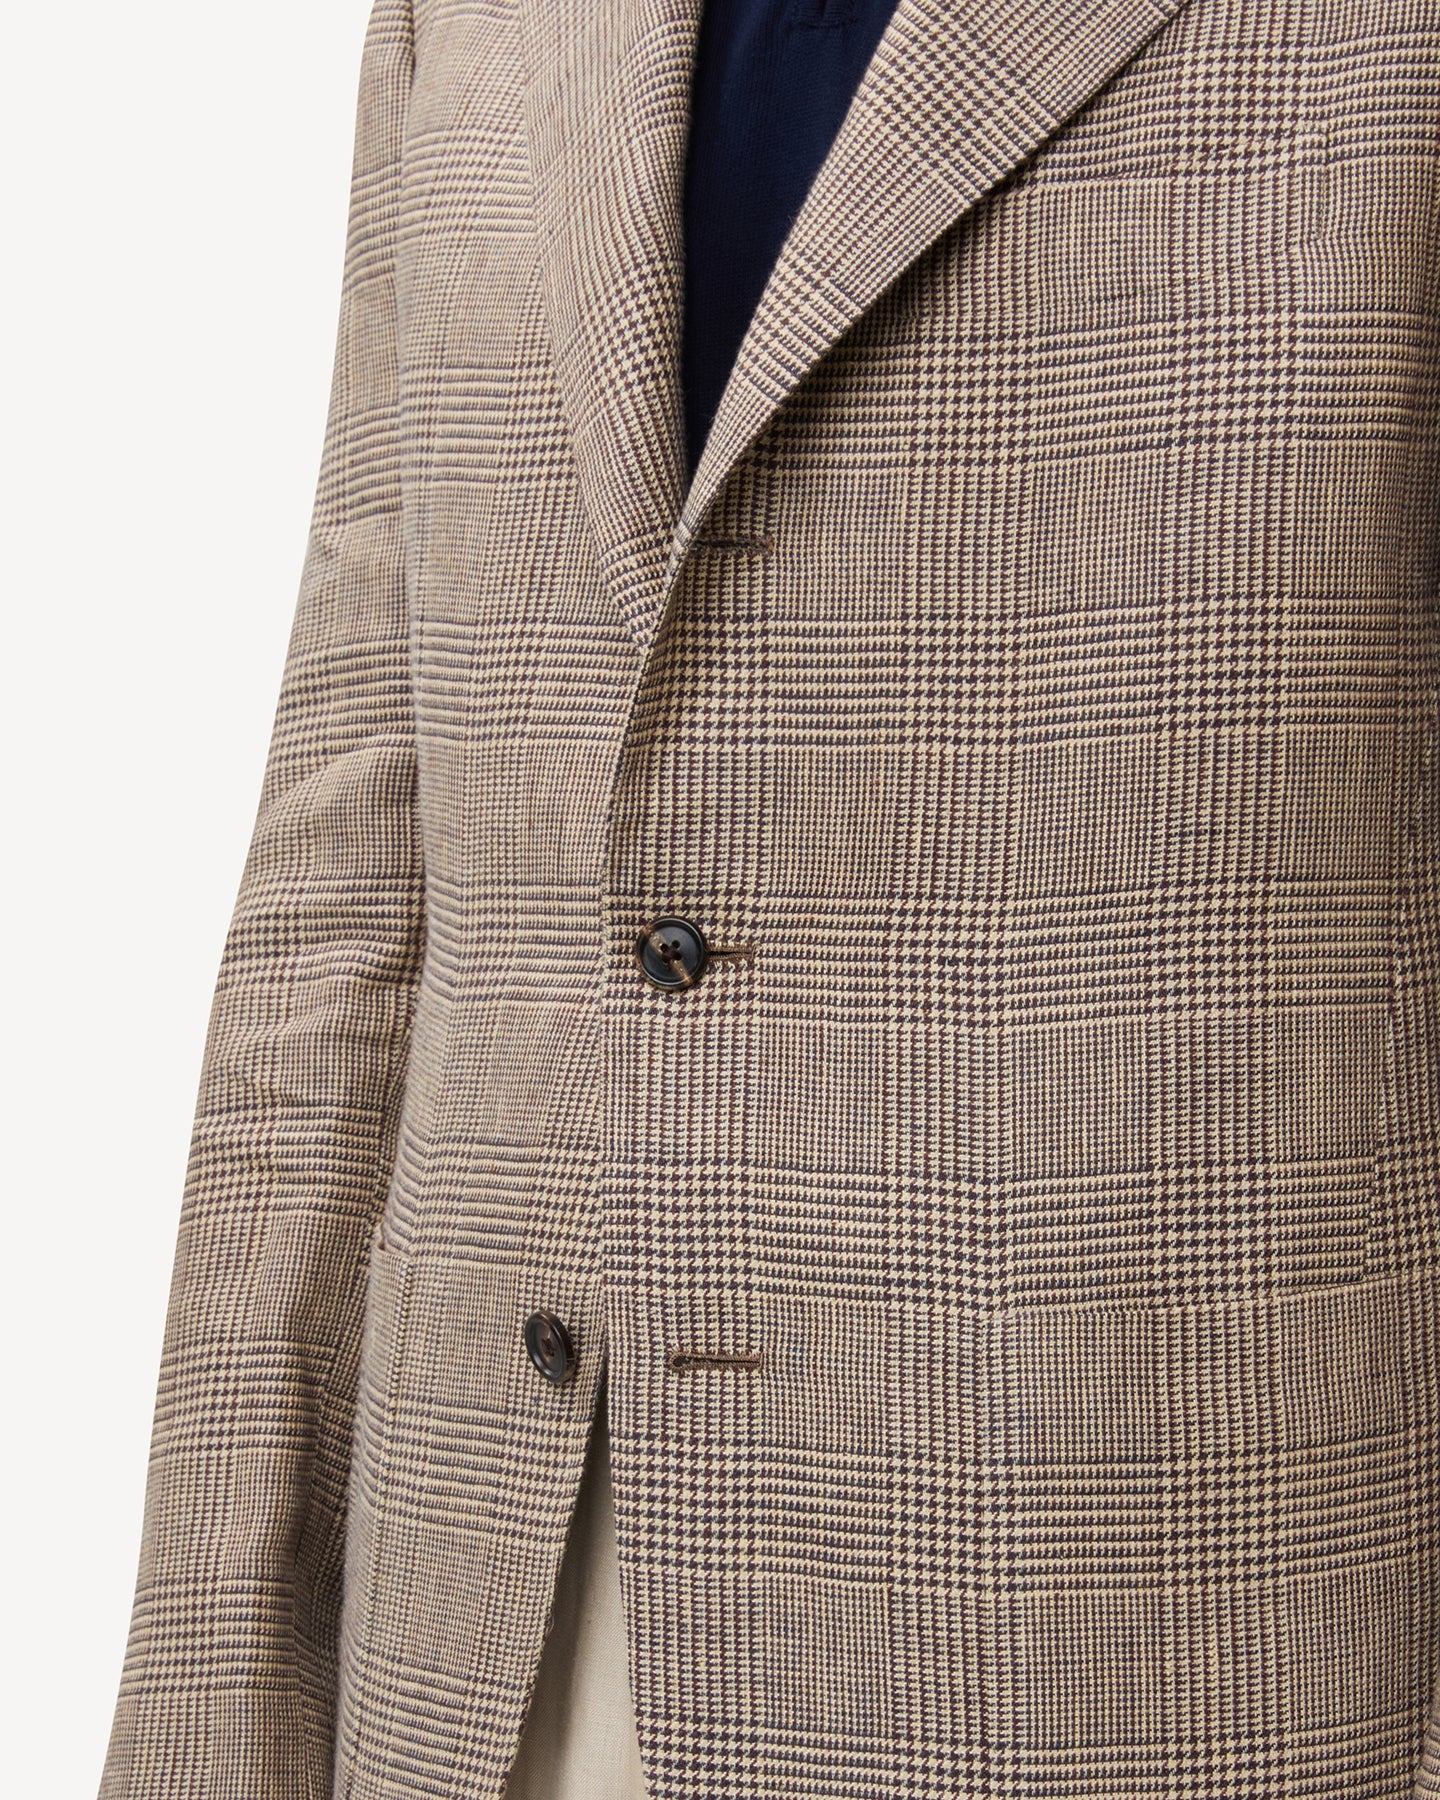 The patch pocket of a brown linen Prince of Wales sport coat